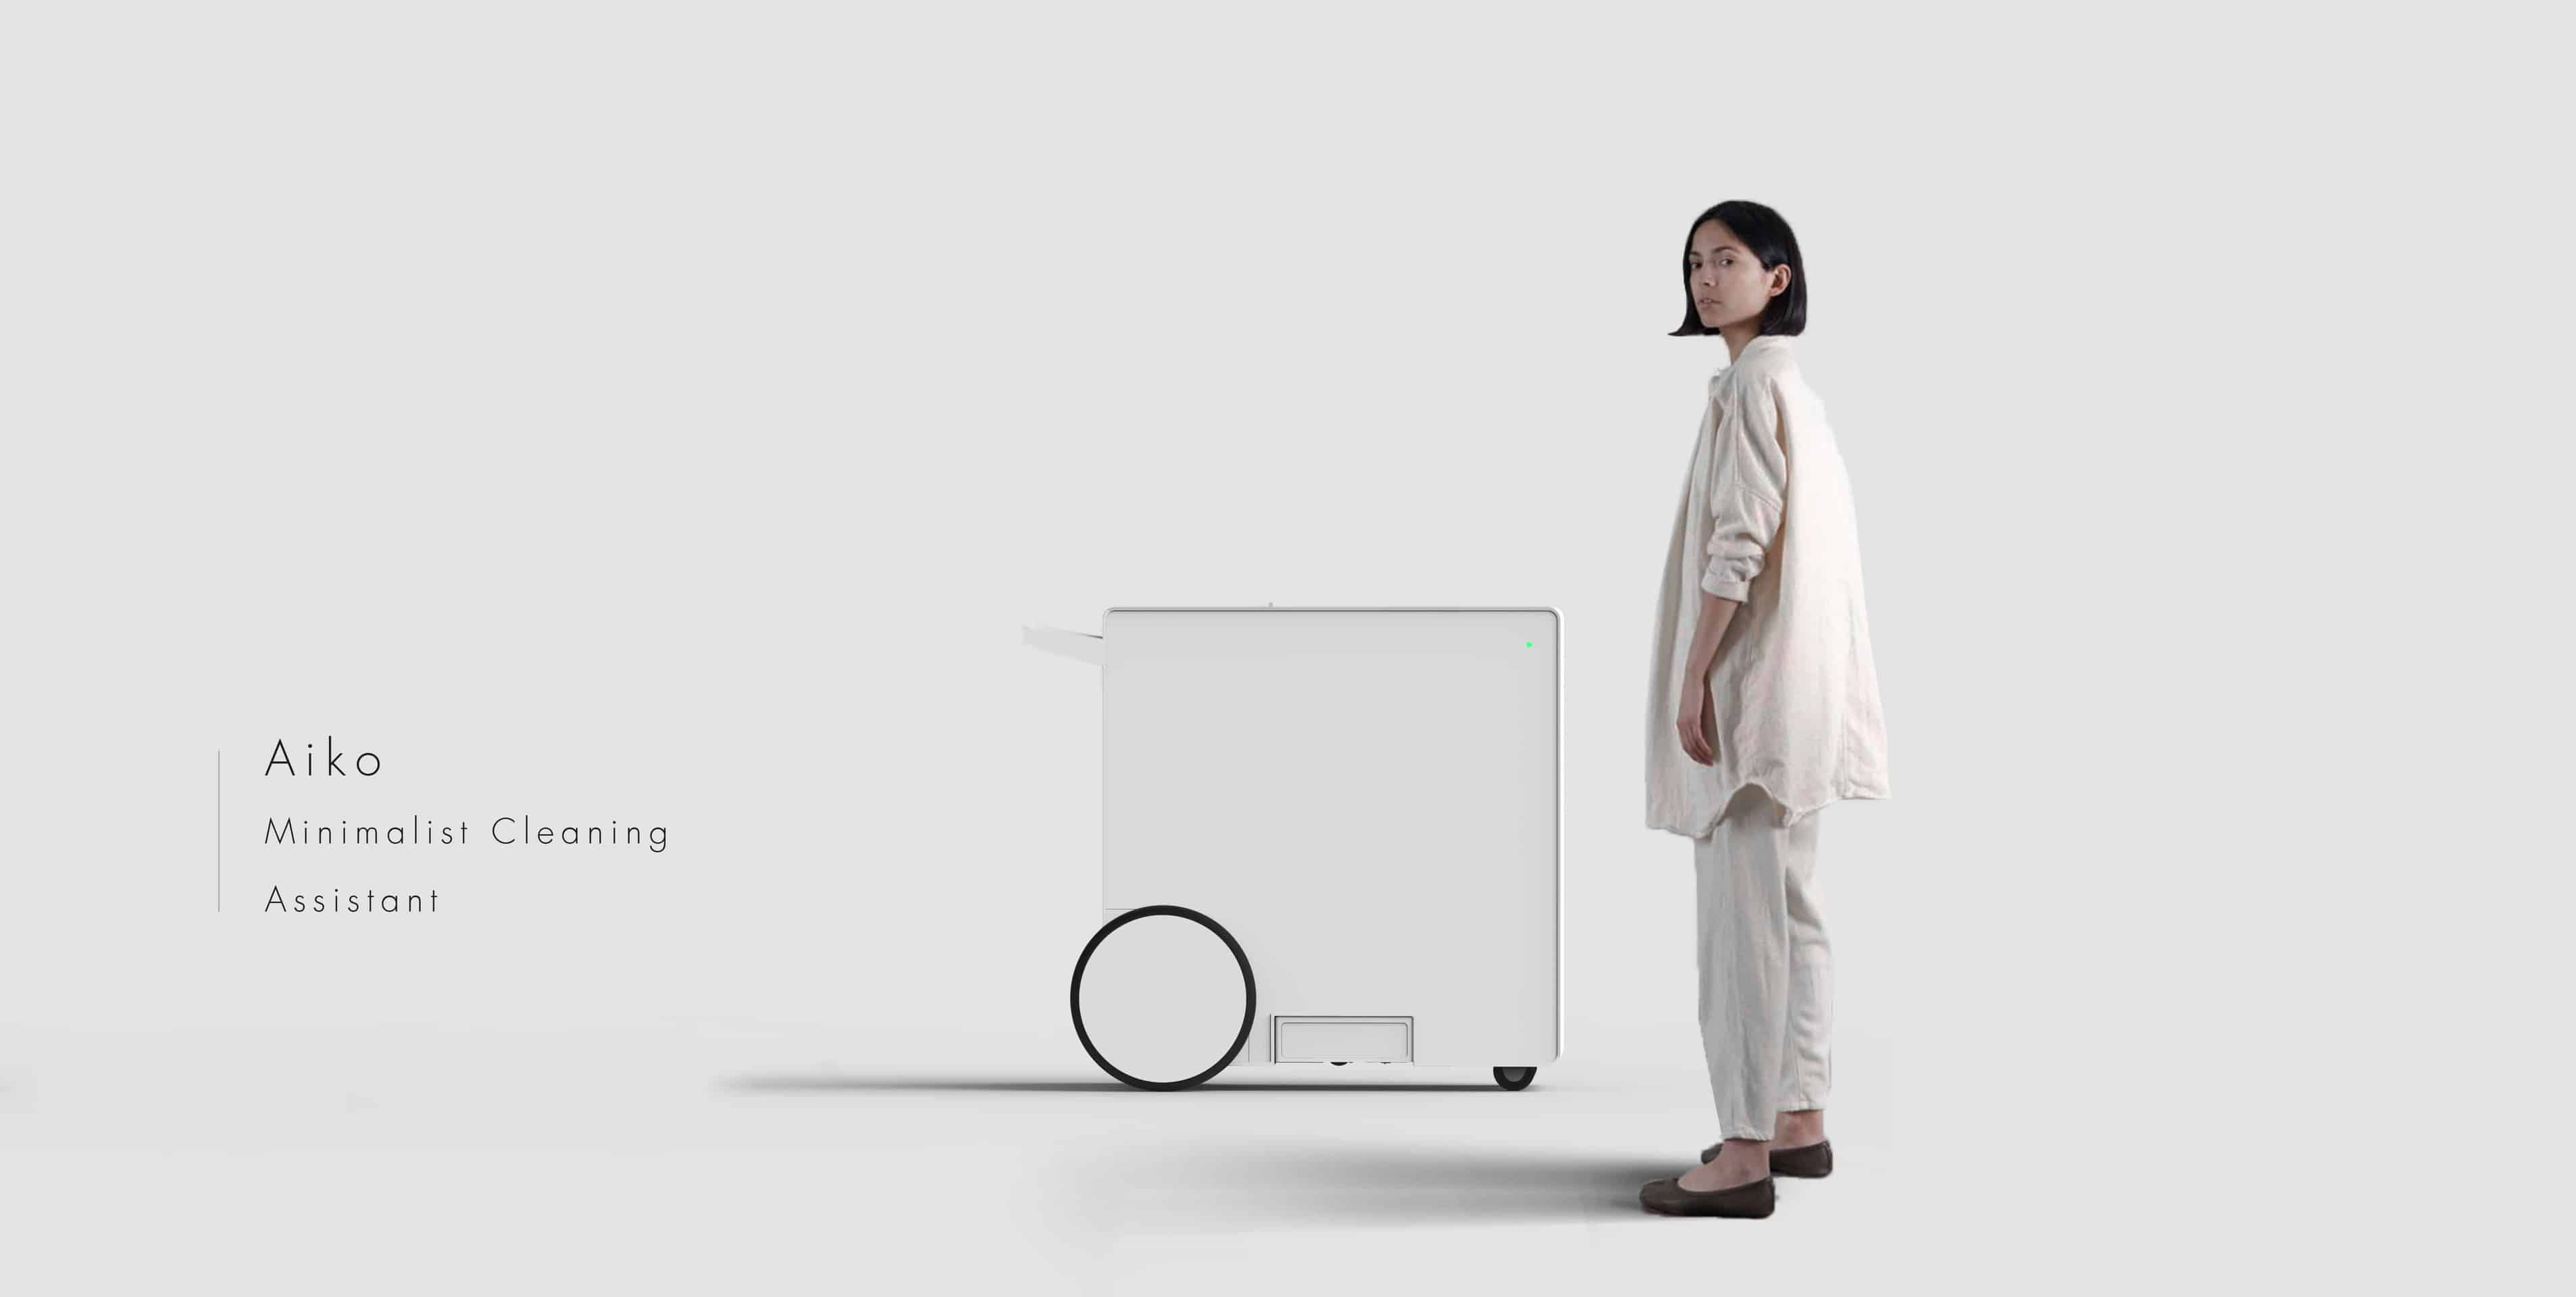 AIKO Minimalist Cleaning Assistant